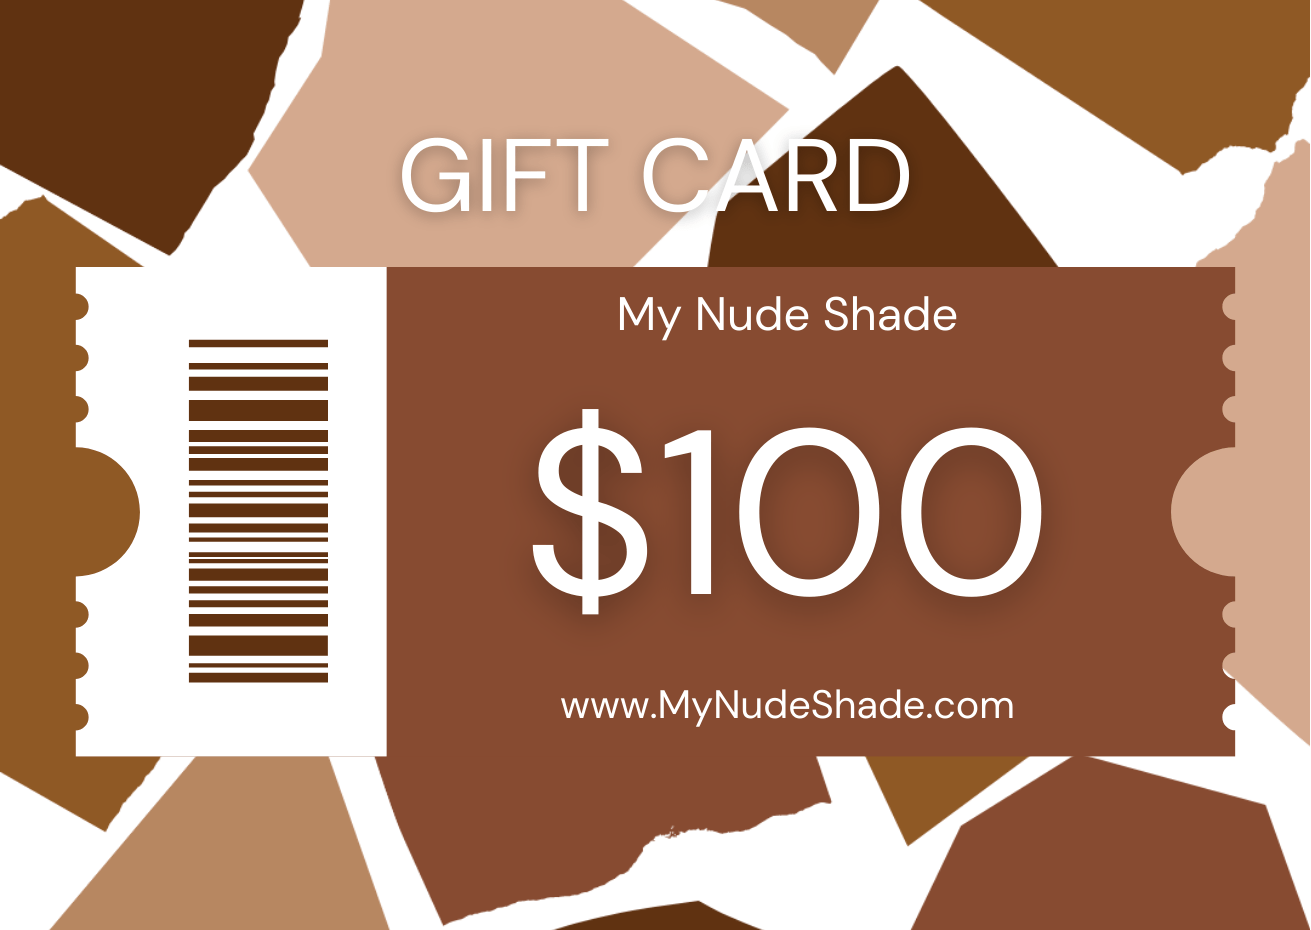 Online $100 USD gift card to use on online purchases for performers of color.